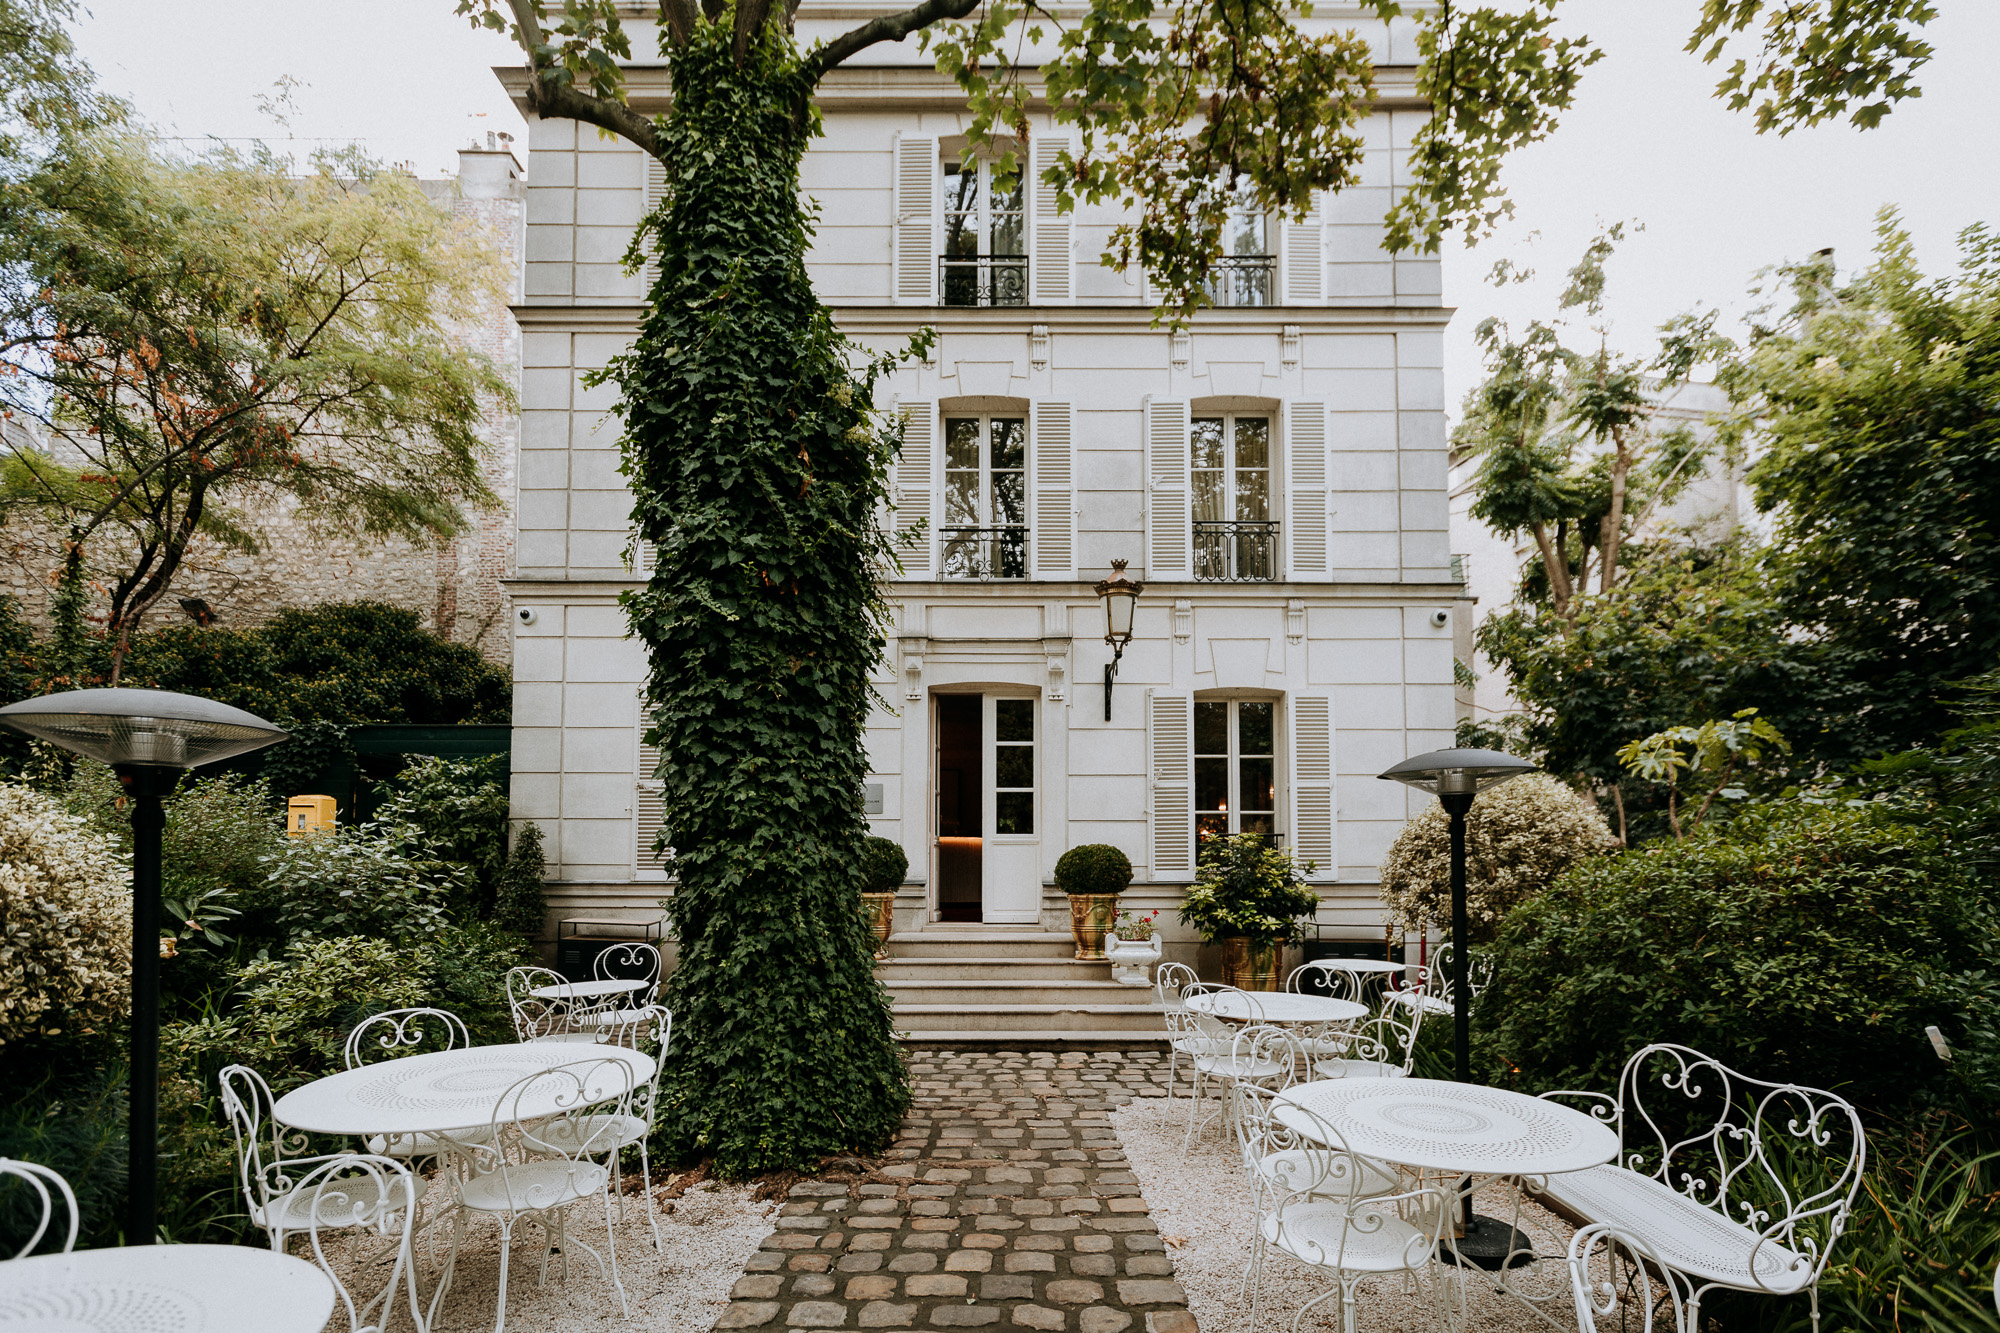 The hotel is hidden in a private alleyway in the middle of Montmartre